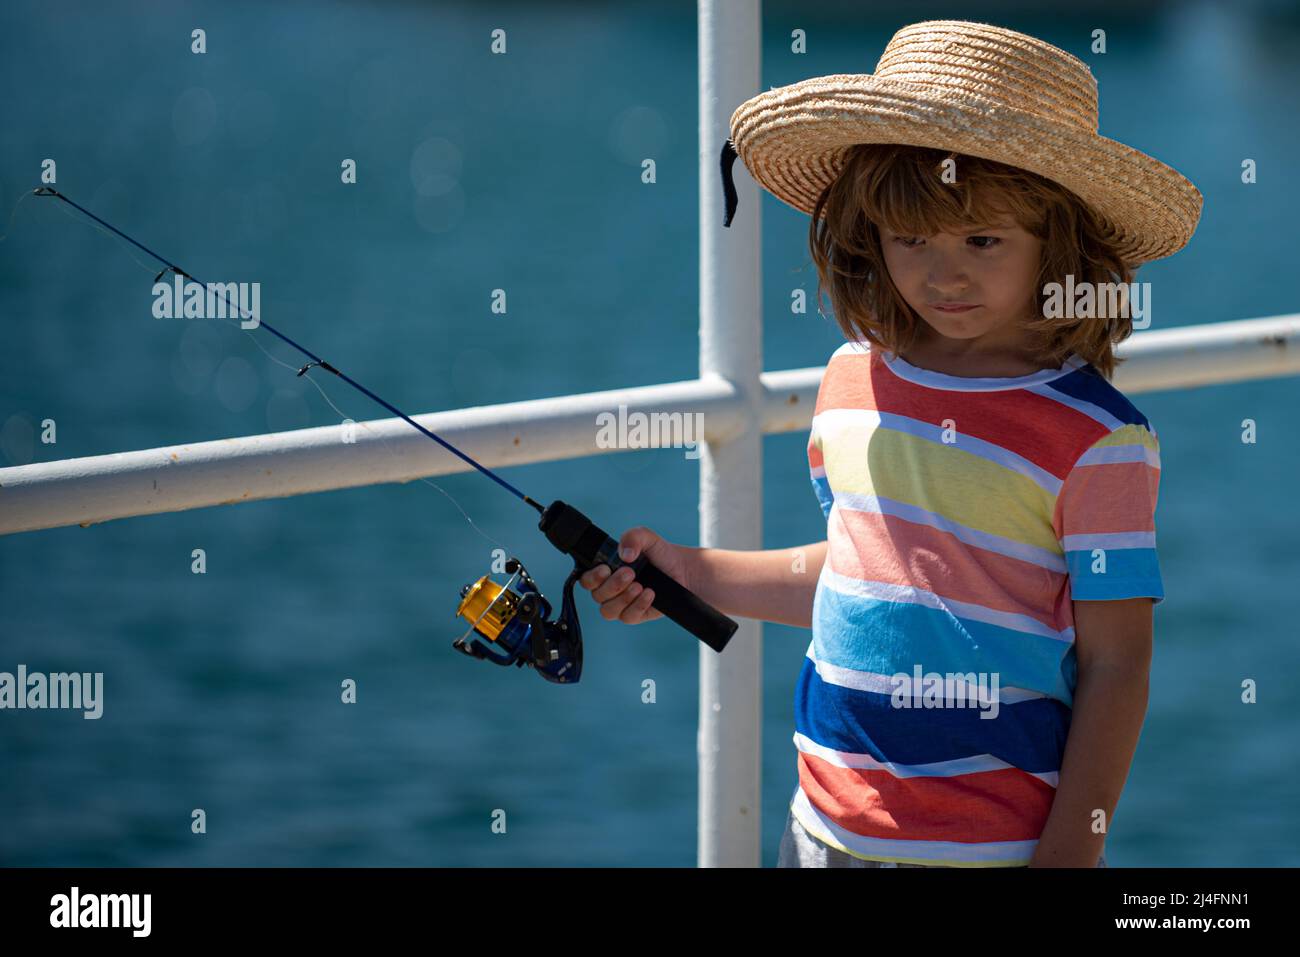 Child boy engaged in fishing hobbies, holds a fishing rod. Summer